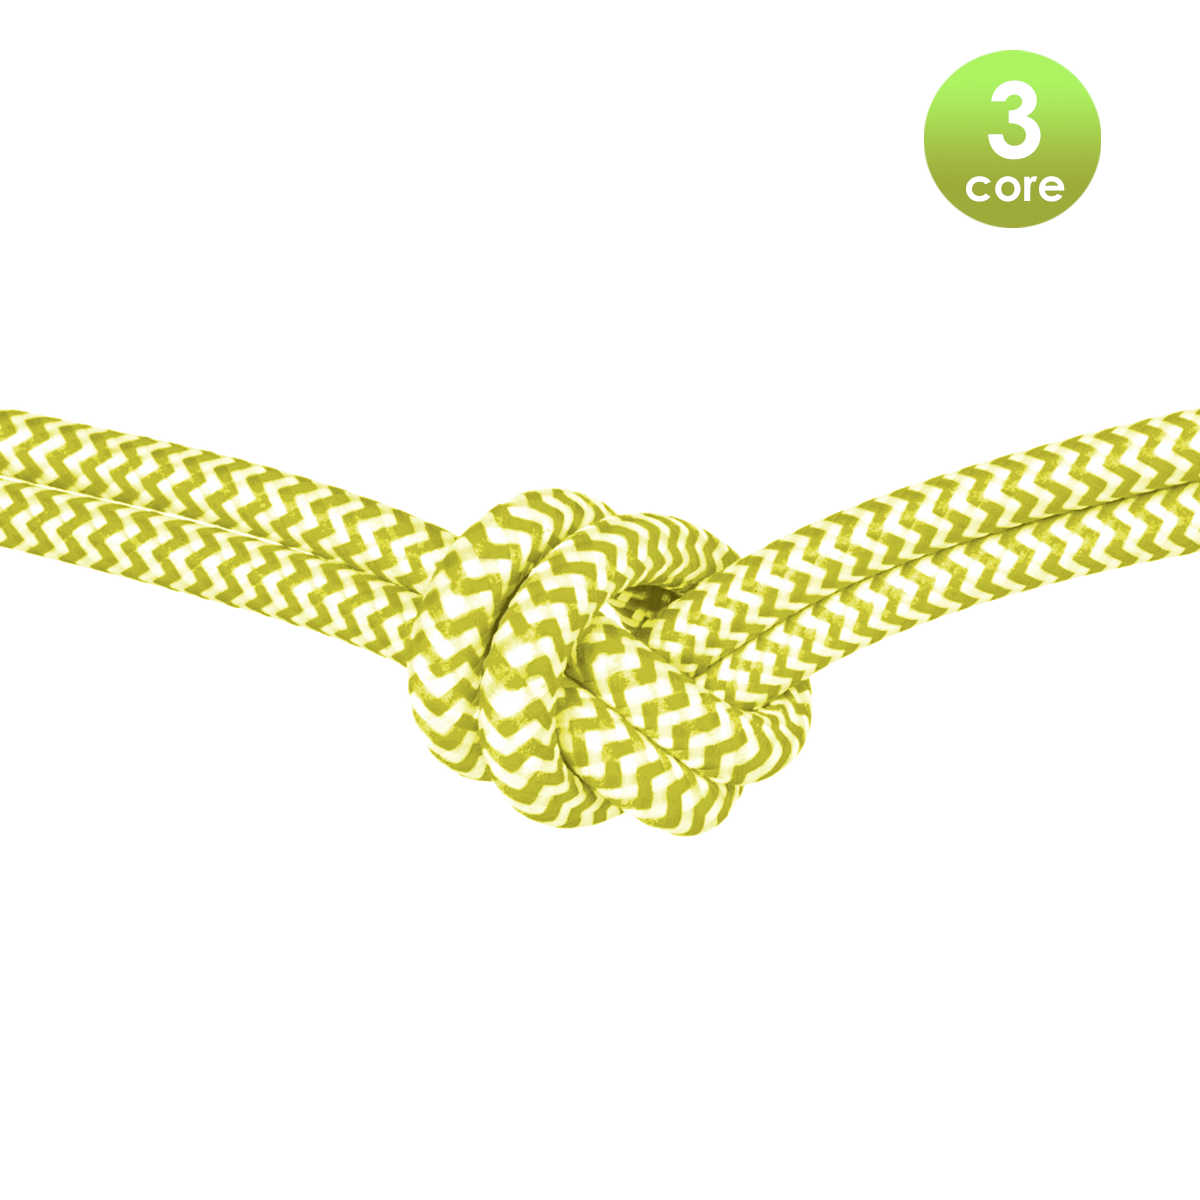 Tangla lighting - TLCB03012A - 3c - Fabric cable 3 core - in yellow and white